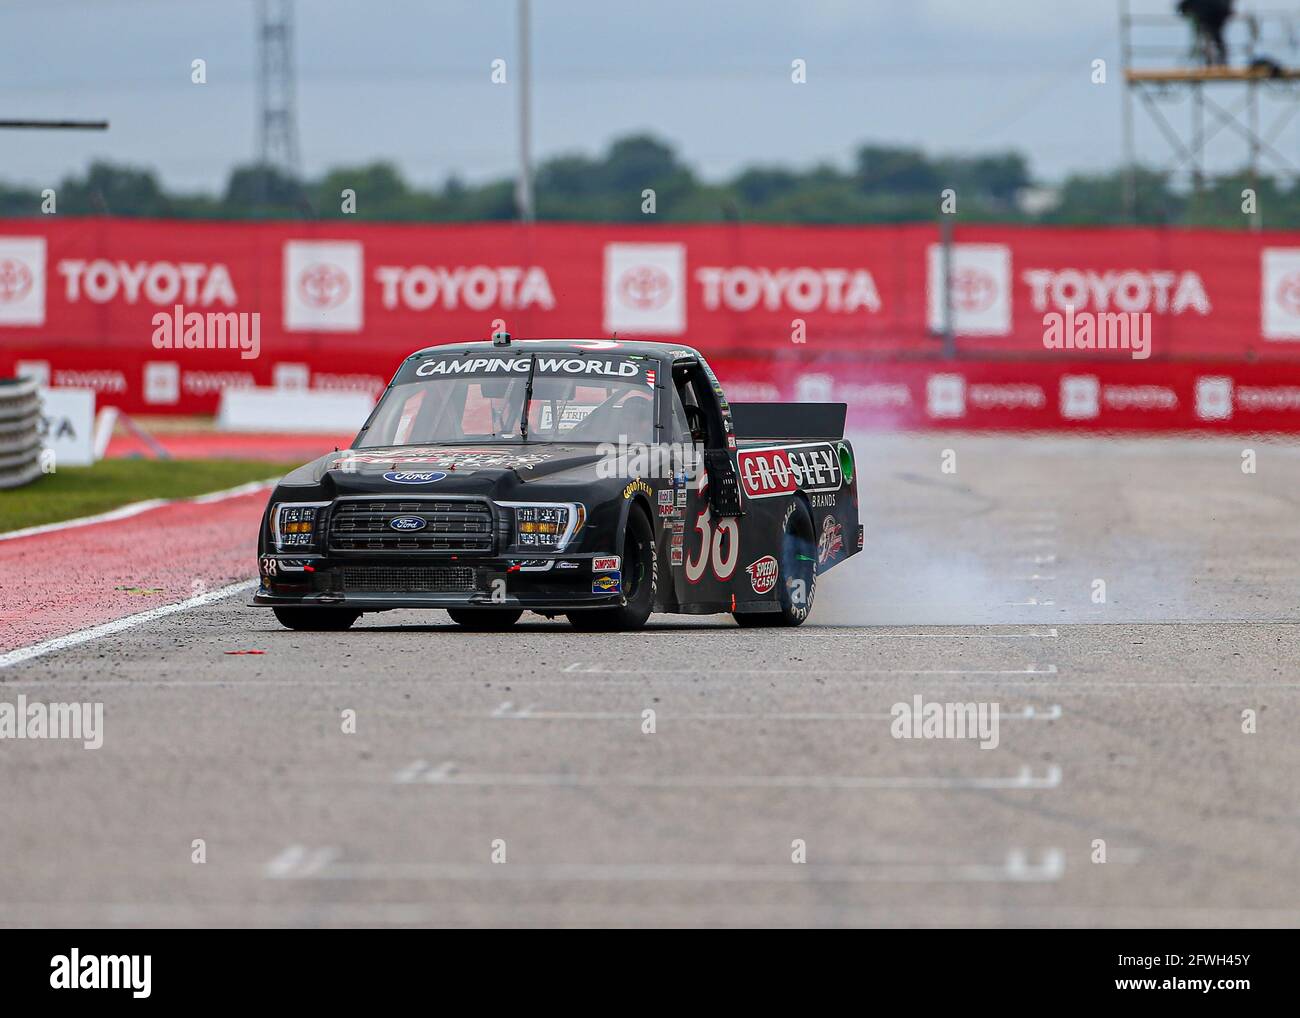 Austin. 22nd May, 2021. NASCAR Camping World Truck Series driver Todd Gilliland (38) celebrates a win in the Toyota Tundra 225 at Circuit of the Americas in Austin, Texas, on May 22, 2021. Credit: Scott Coleman/ZUMA Wire/Alamy Live News Stock Photo